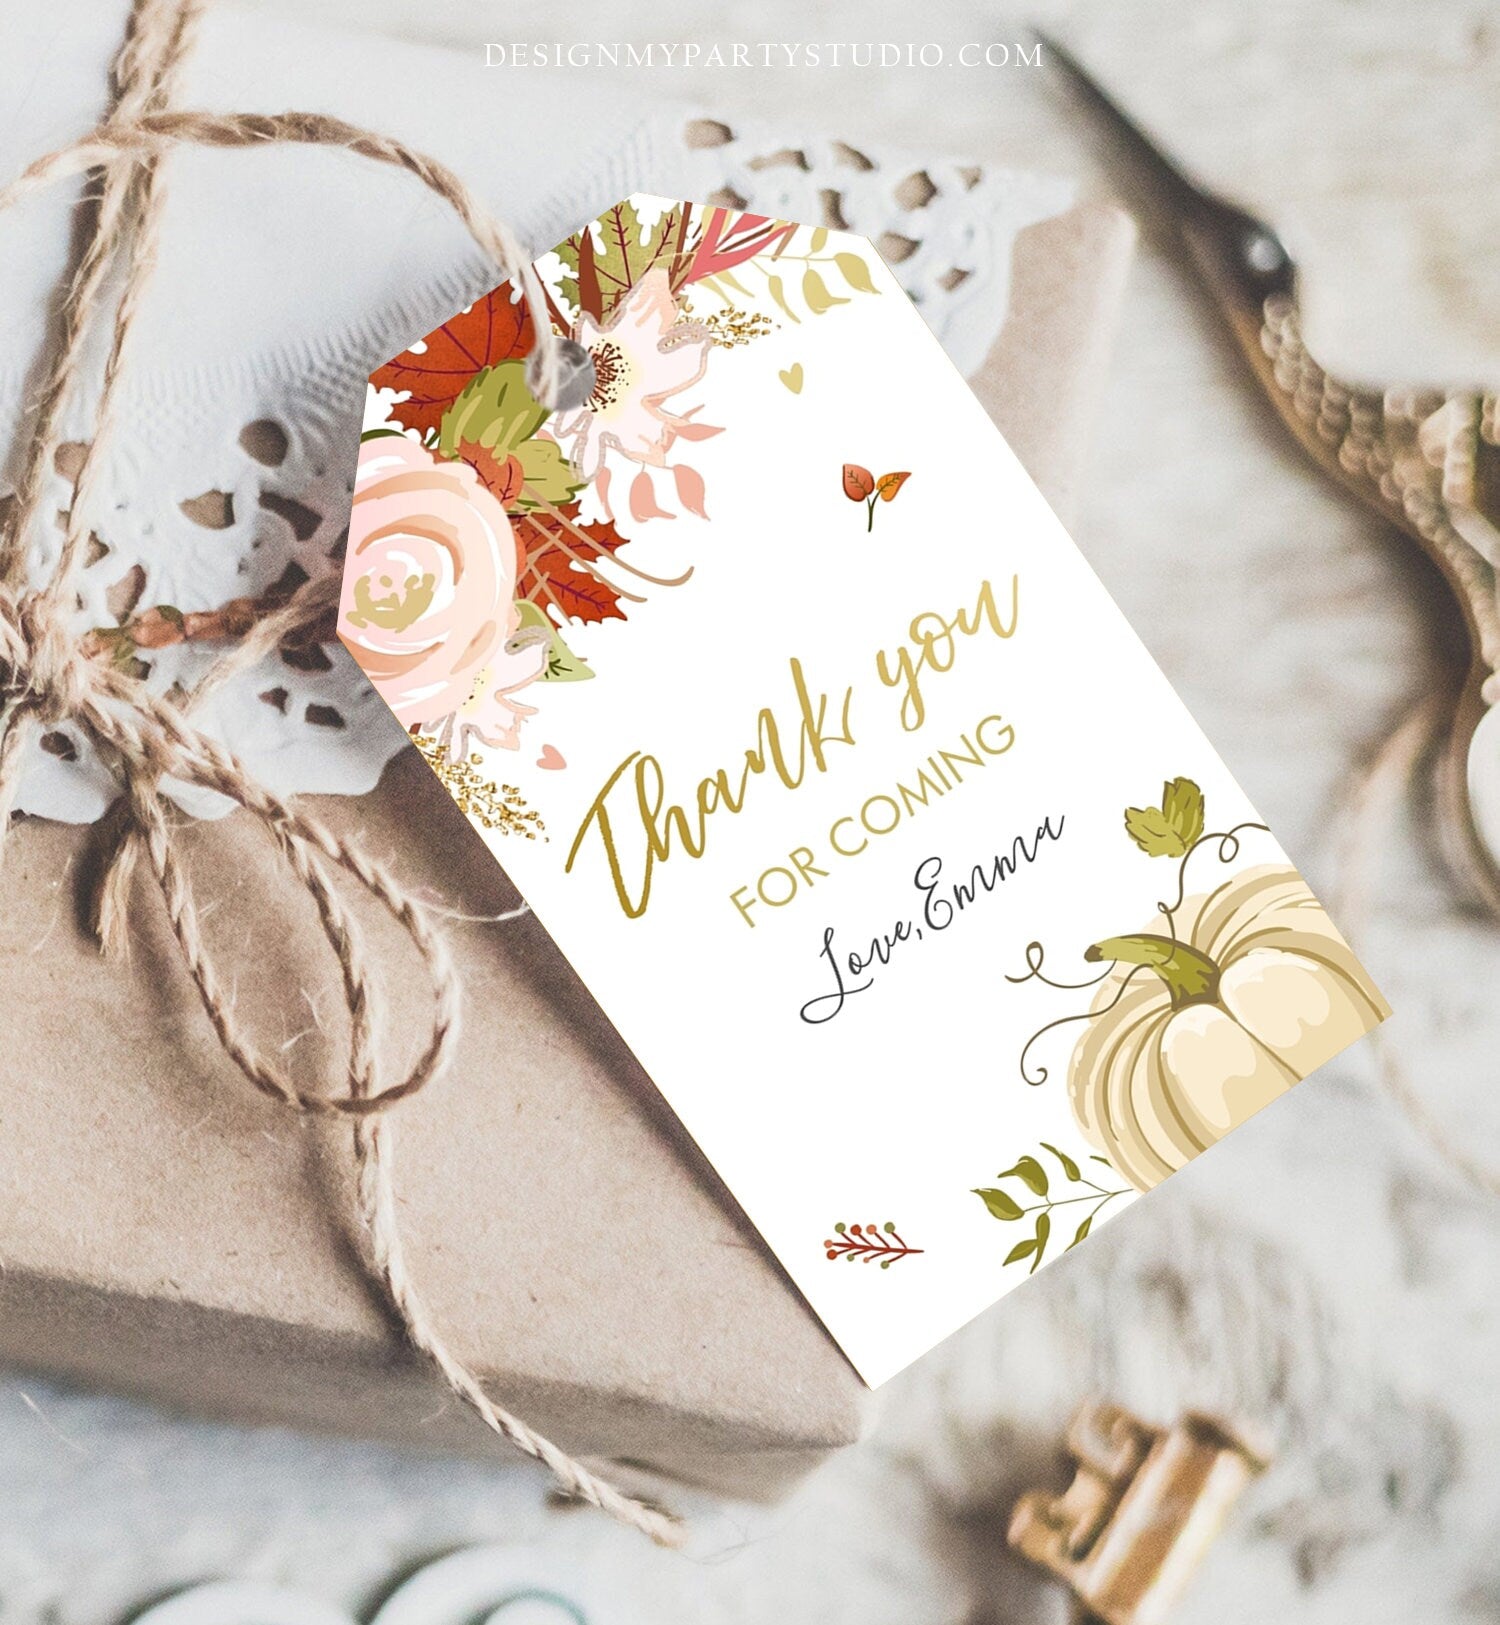 Editable Pumpkin Favor Tags Thank You Tag Fall In Love Bridal Shower Autumn Floral Flowers Pink Gold Orange Rustic Corjl Template 0176